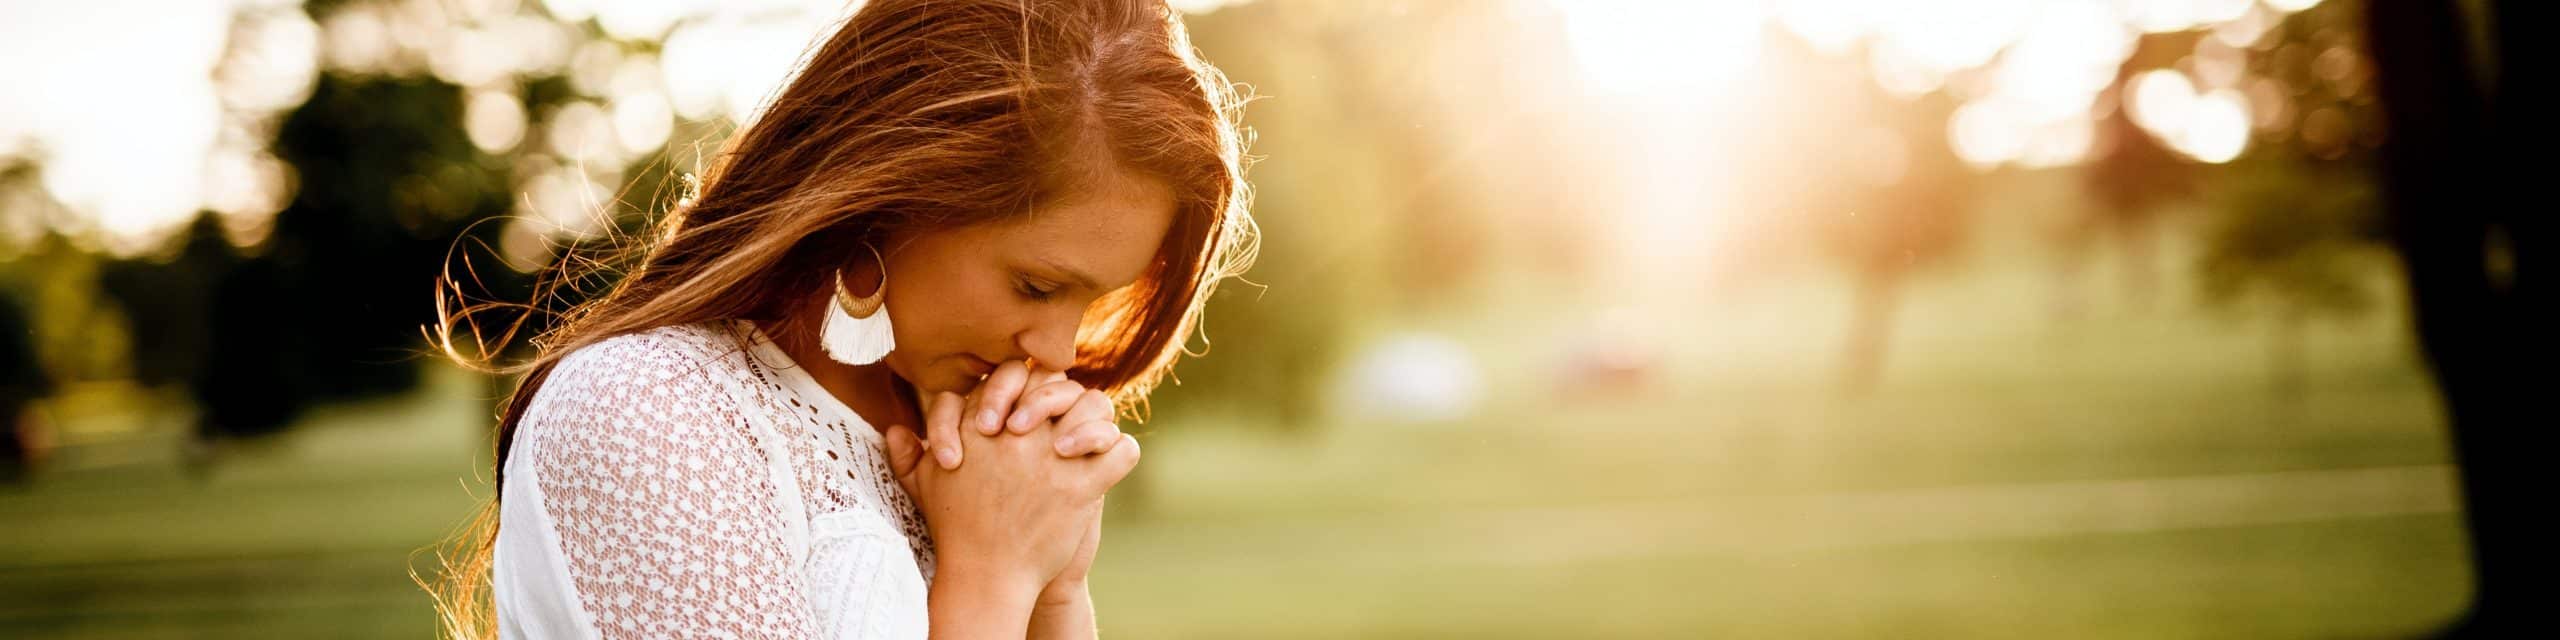 What Are The Benefits Of Prayer?